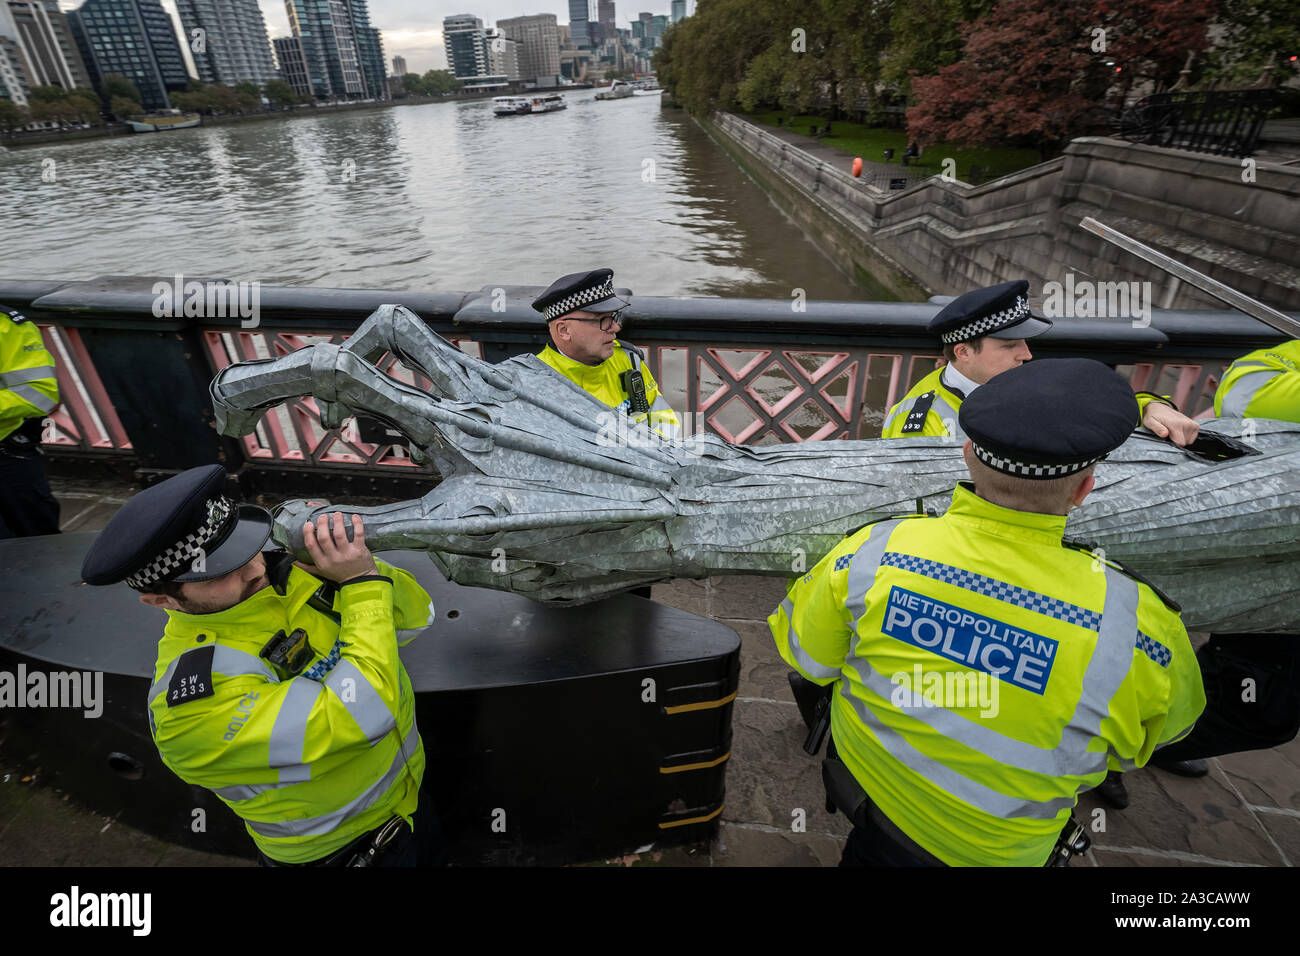 London, UK. 7th Oct, 2019. Police seize body parts of a giant metallic figure from Extinction Rebellion protesters during an occupation of Lambeth Bridge. The environmental campaigners begin a new wave of protest action this morning causing disruption in London. The Metropolitan Police confirmed 21 arrests so far this morning. Credit: Guy Corbishley/Alamy Live News Stock Photo